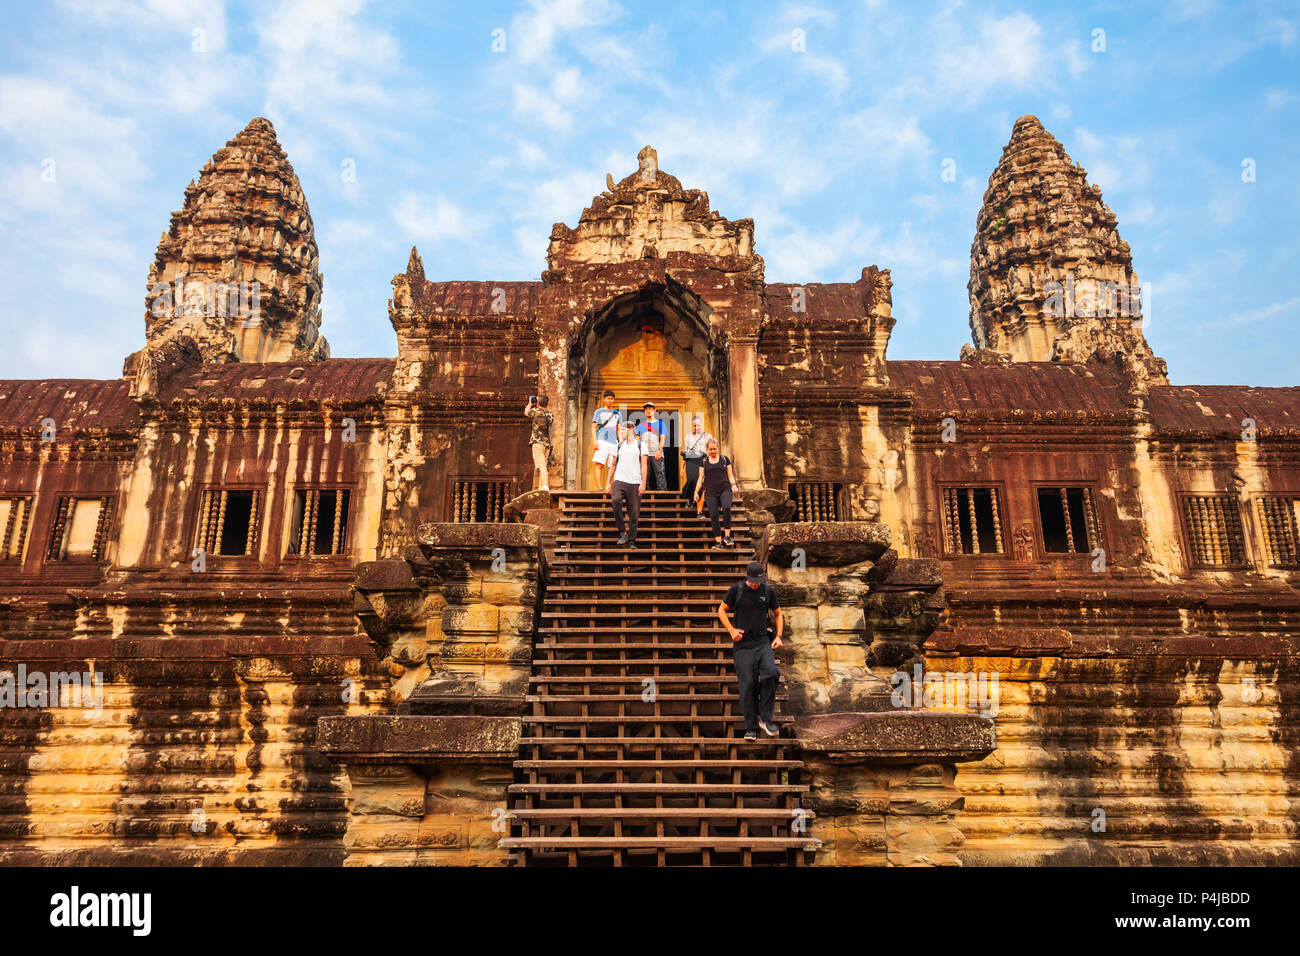 Angkor Wat temple in Siem Reap in Cambodia. Angkor Wat is the largest religious monument in the world. Stock Photo